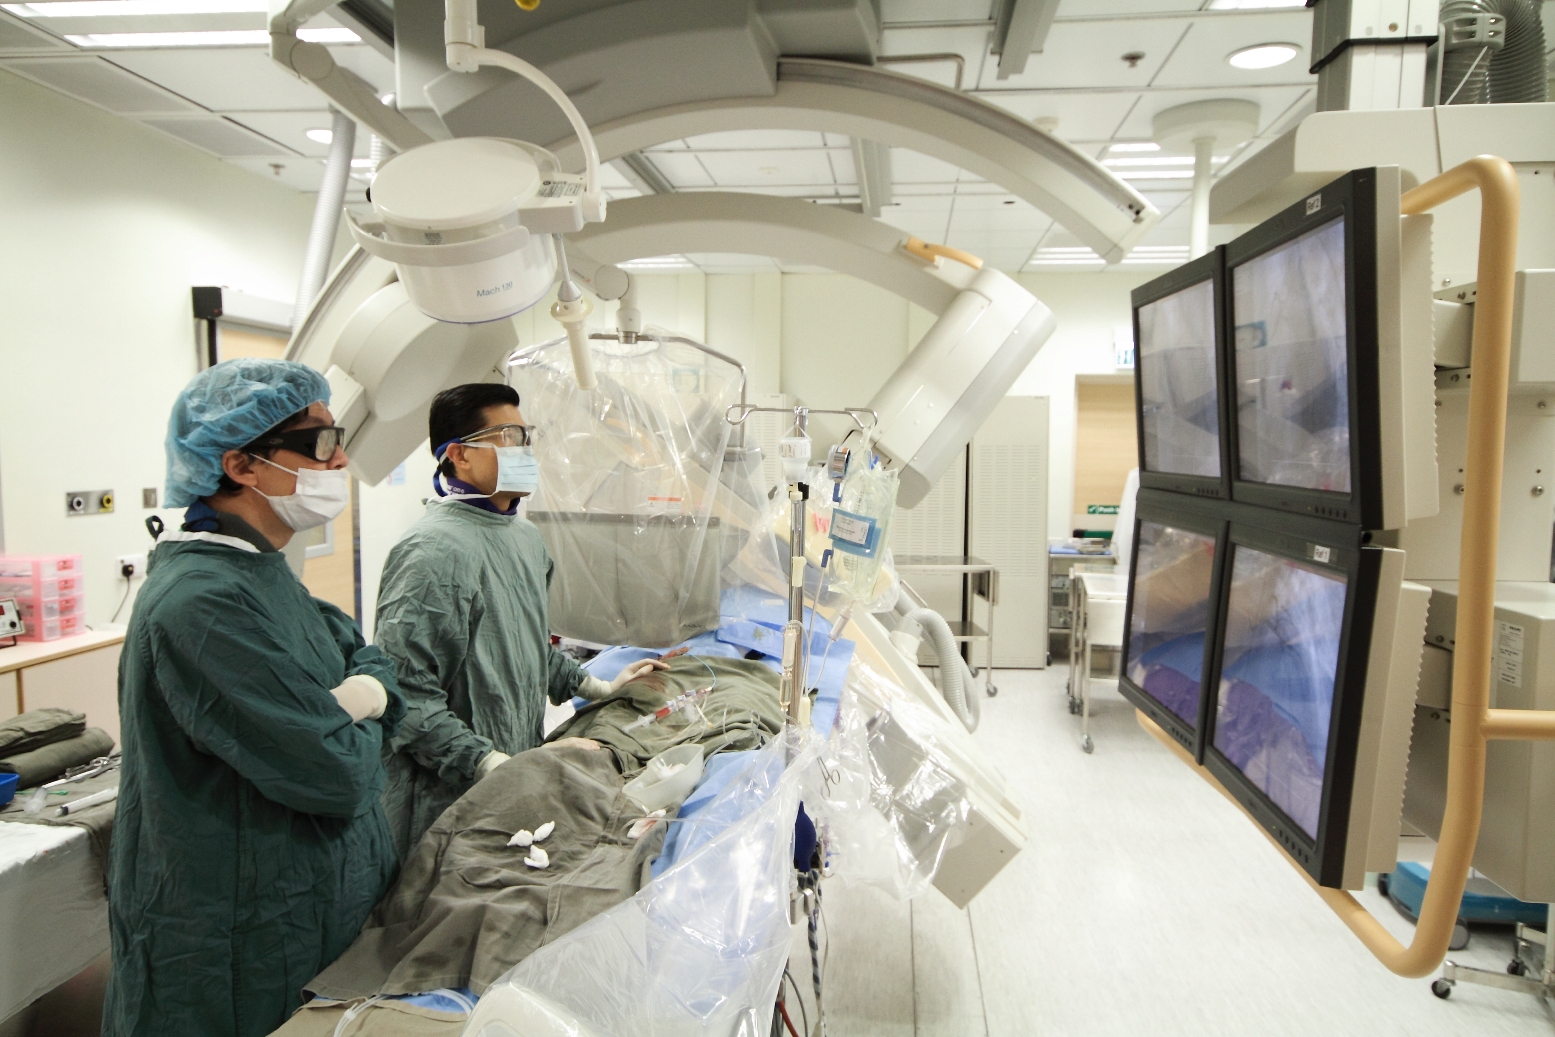 The CUHK-PWH Lee Quo Wei Cardiovascular Intervention Centre, equipped with state-of-the-art facilities and cutting edge technology, performs more than 2,500 invasive cardiovascular procedures every year to serve patients suffering from cardiovascular diseases in the territory